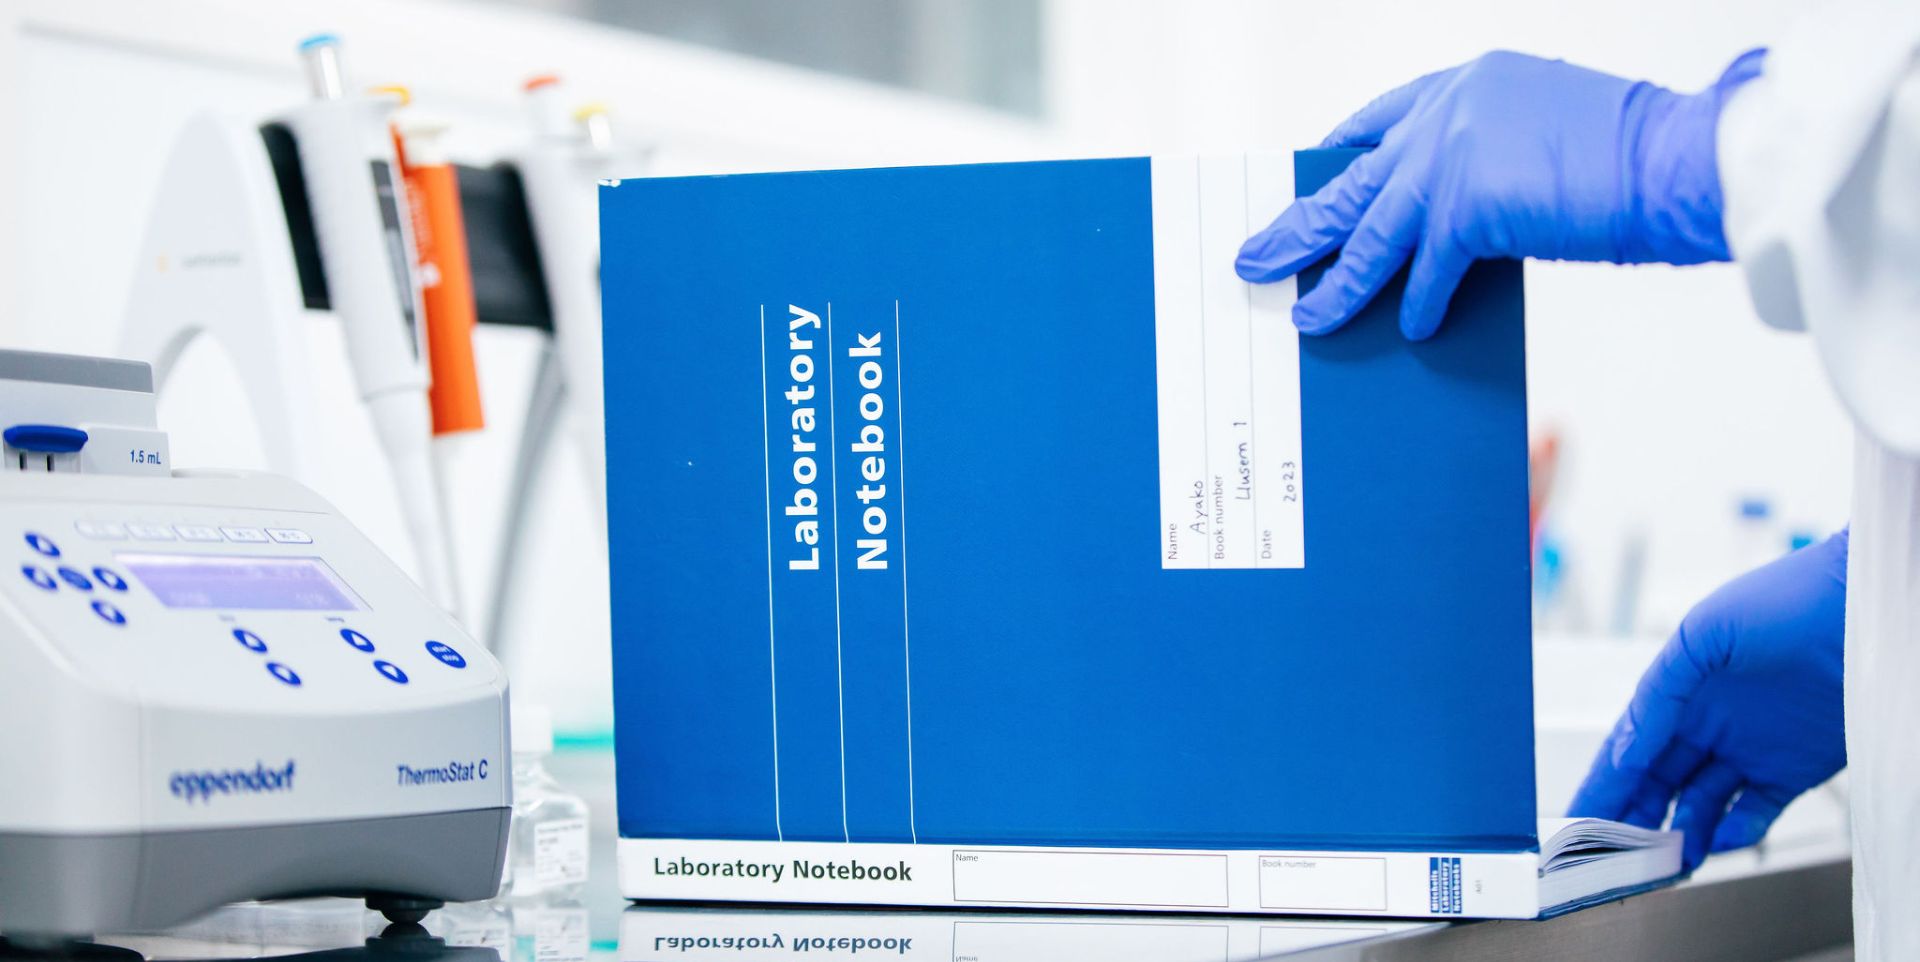 Moving into a new lab space: image depicts a scientist in a lab coat with a blue glove opening a bright blue notebook titled "Laboratory notes". Lab equipment can be seen to the left in the background.